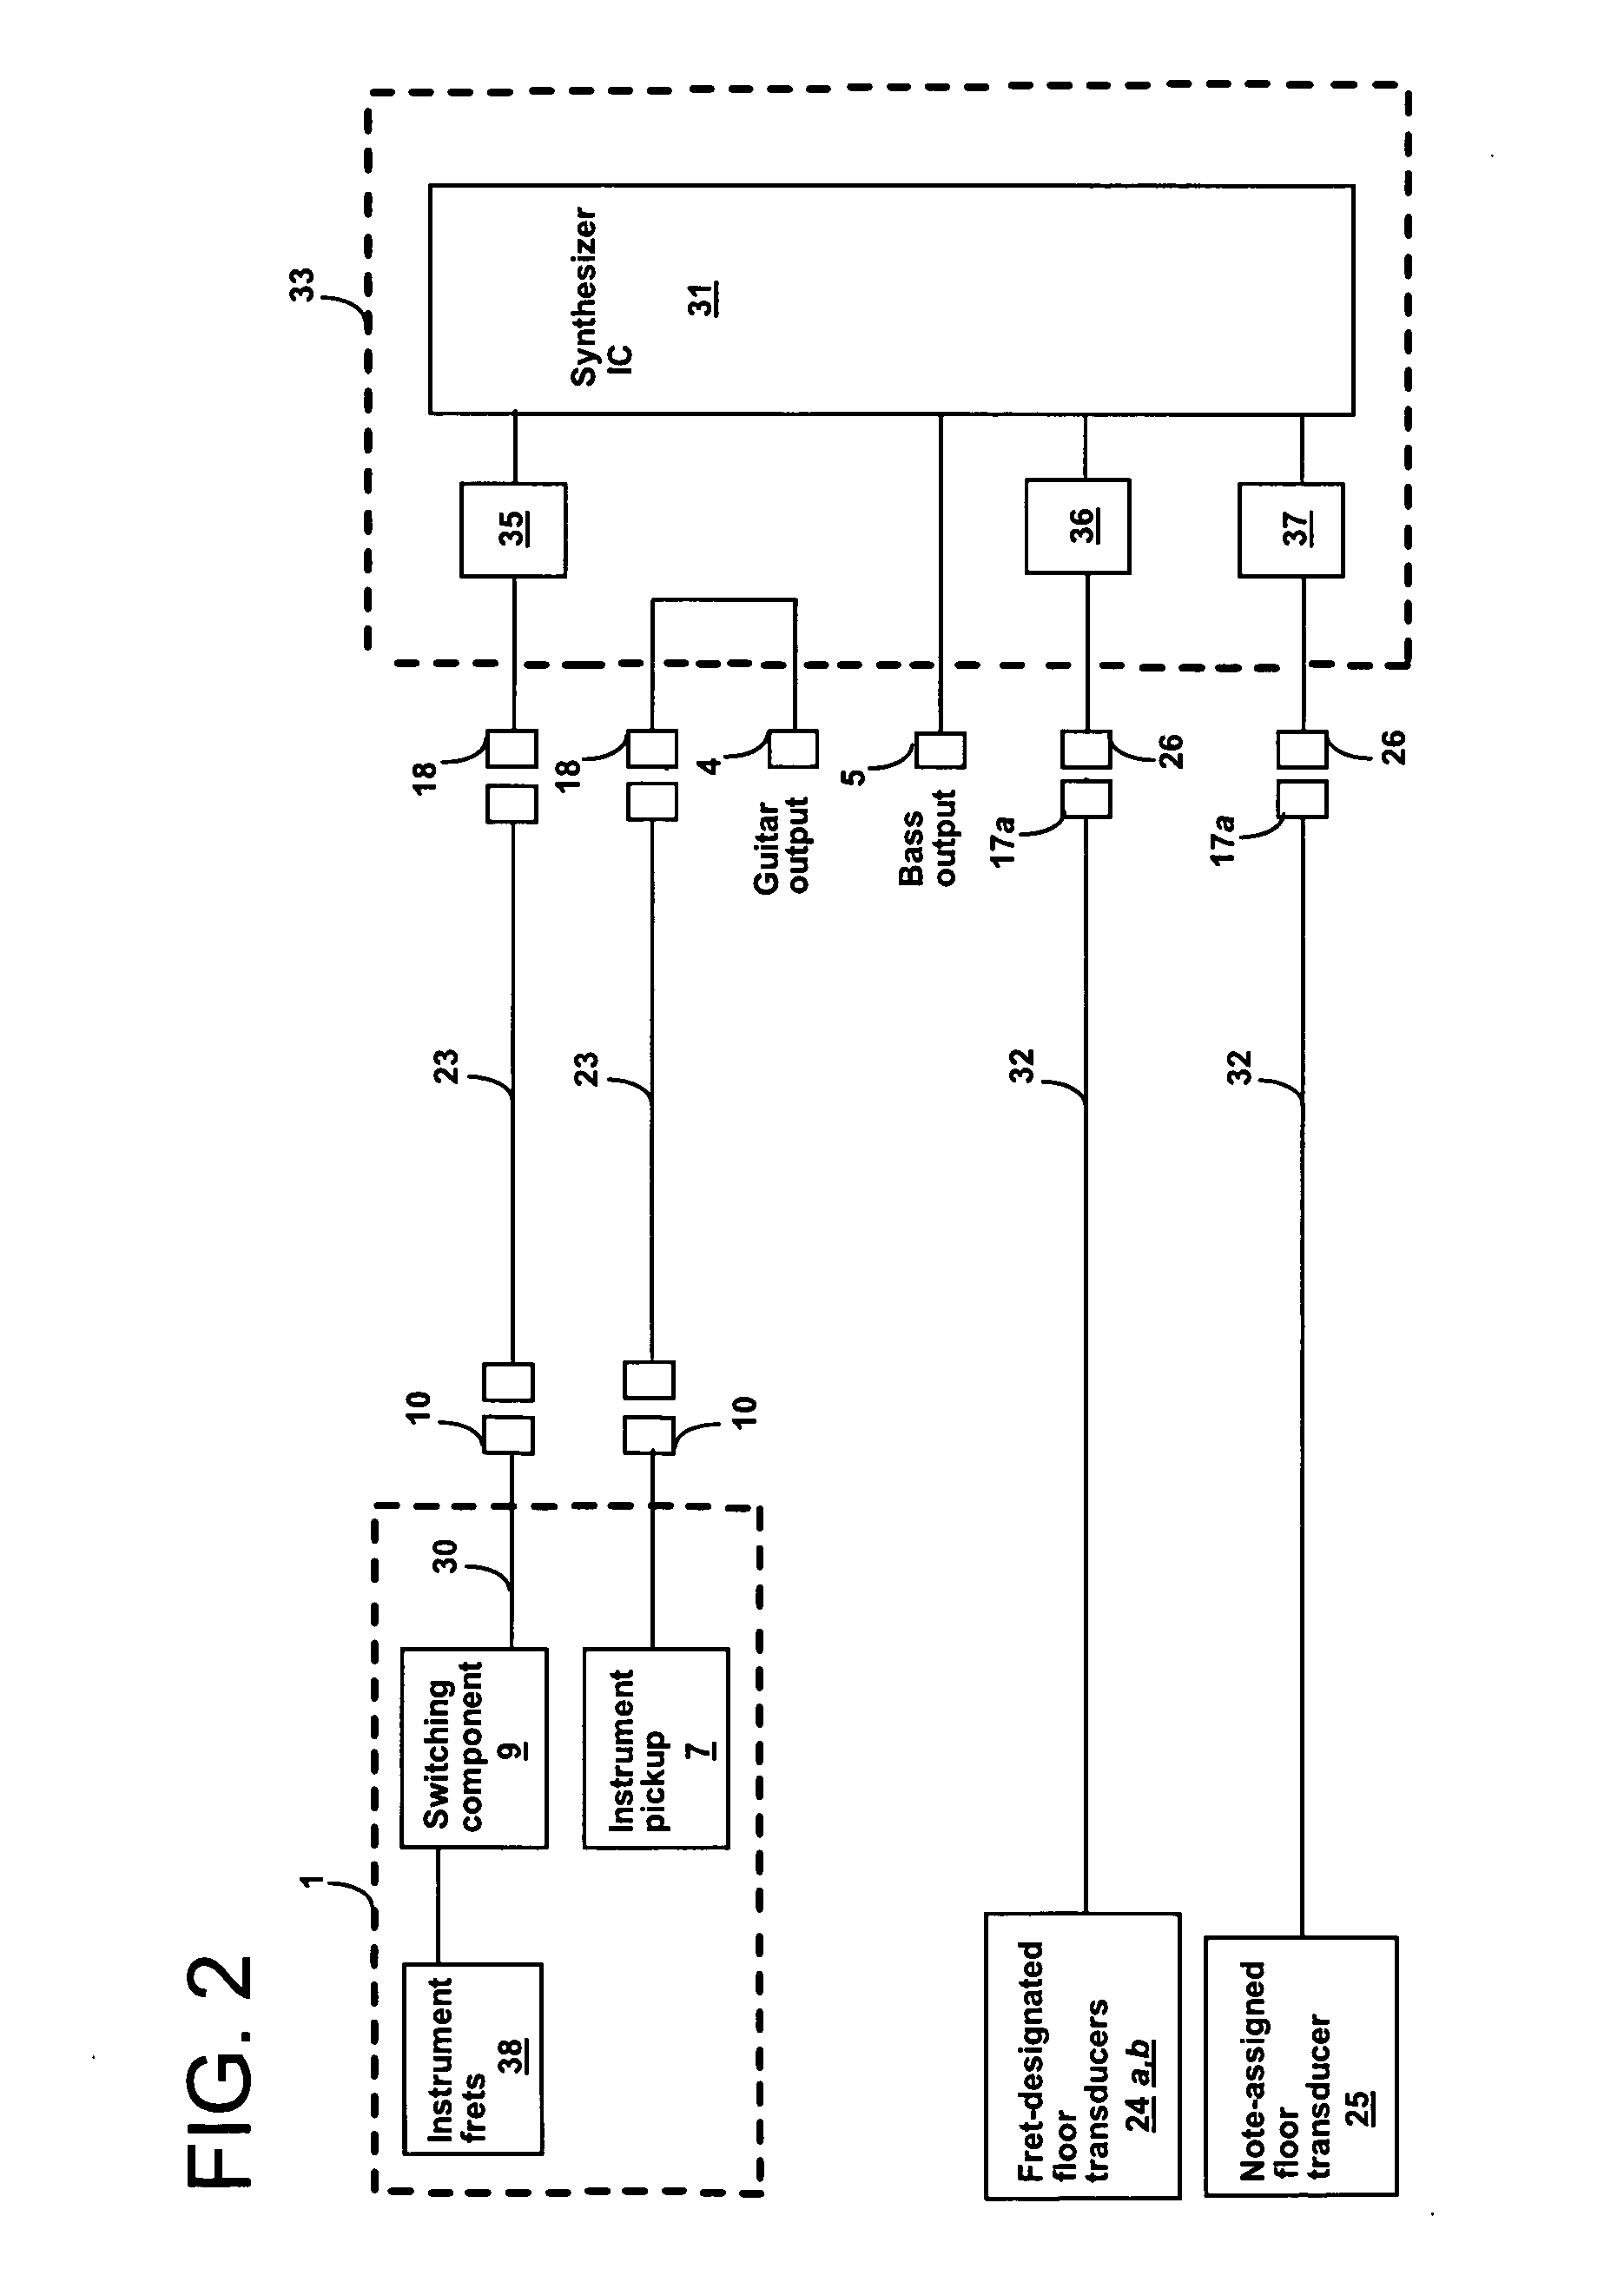 Musical instrument with system and methods for actuating designated accompaniment sounds